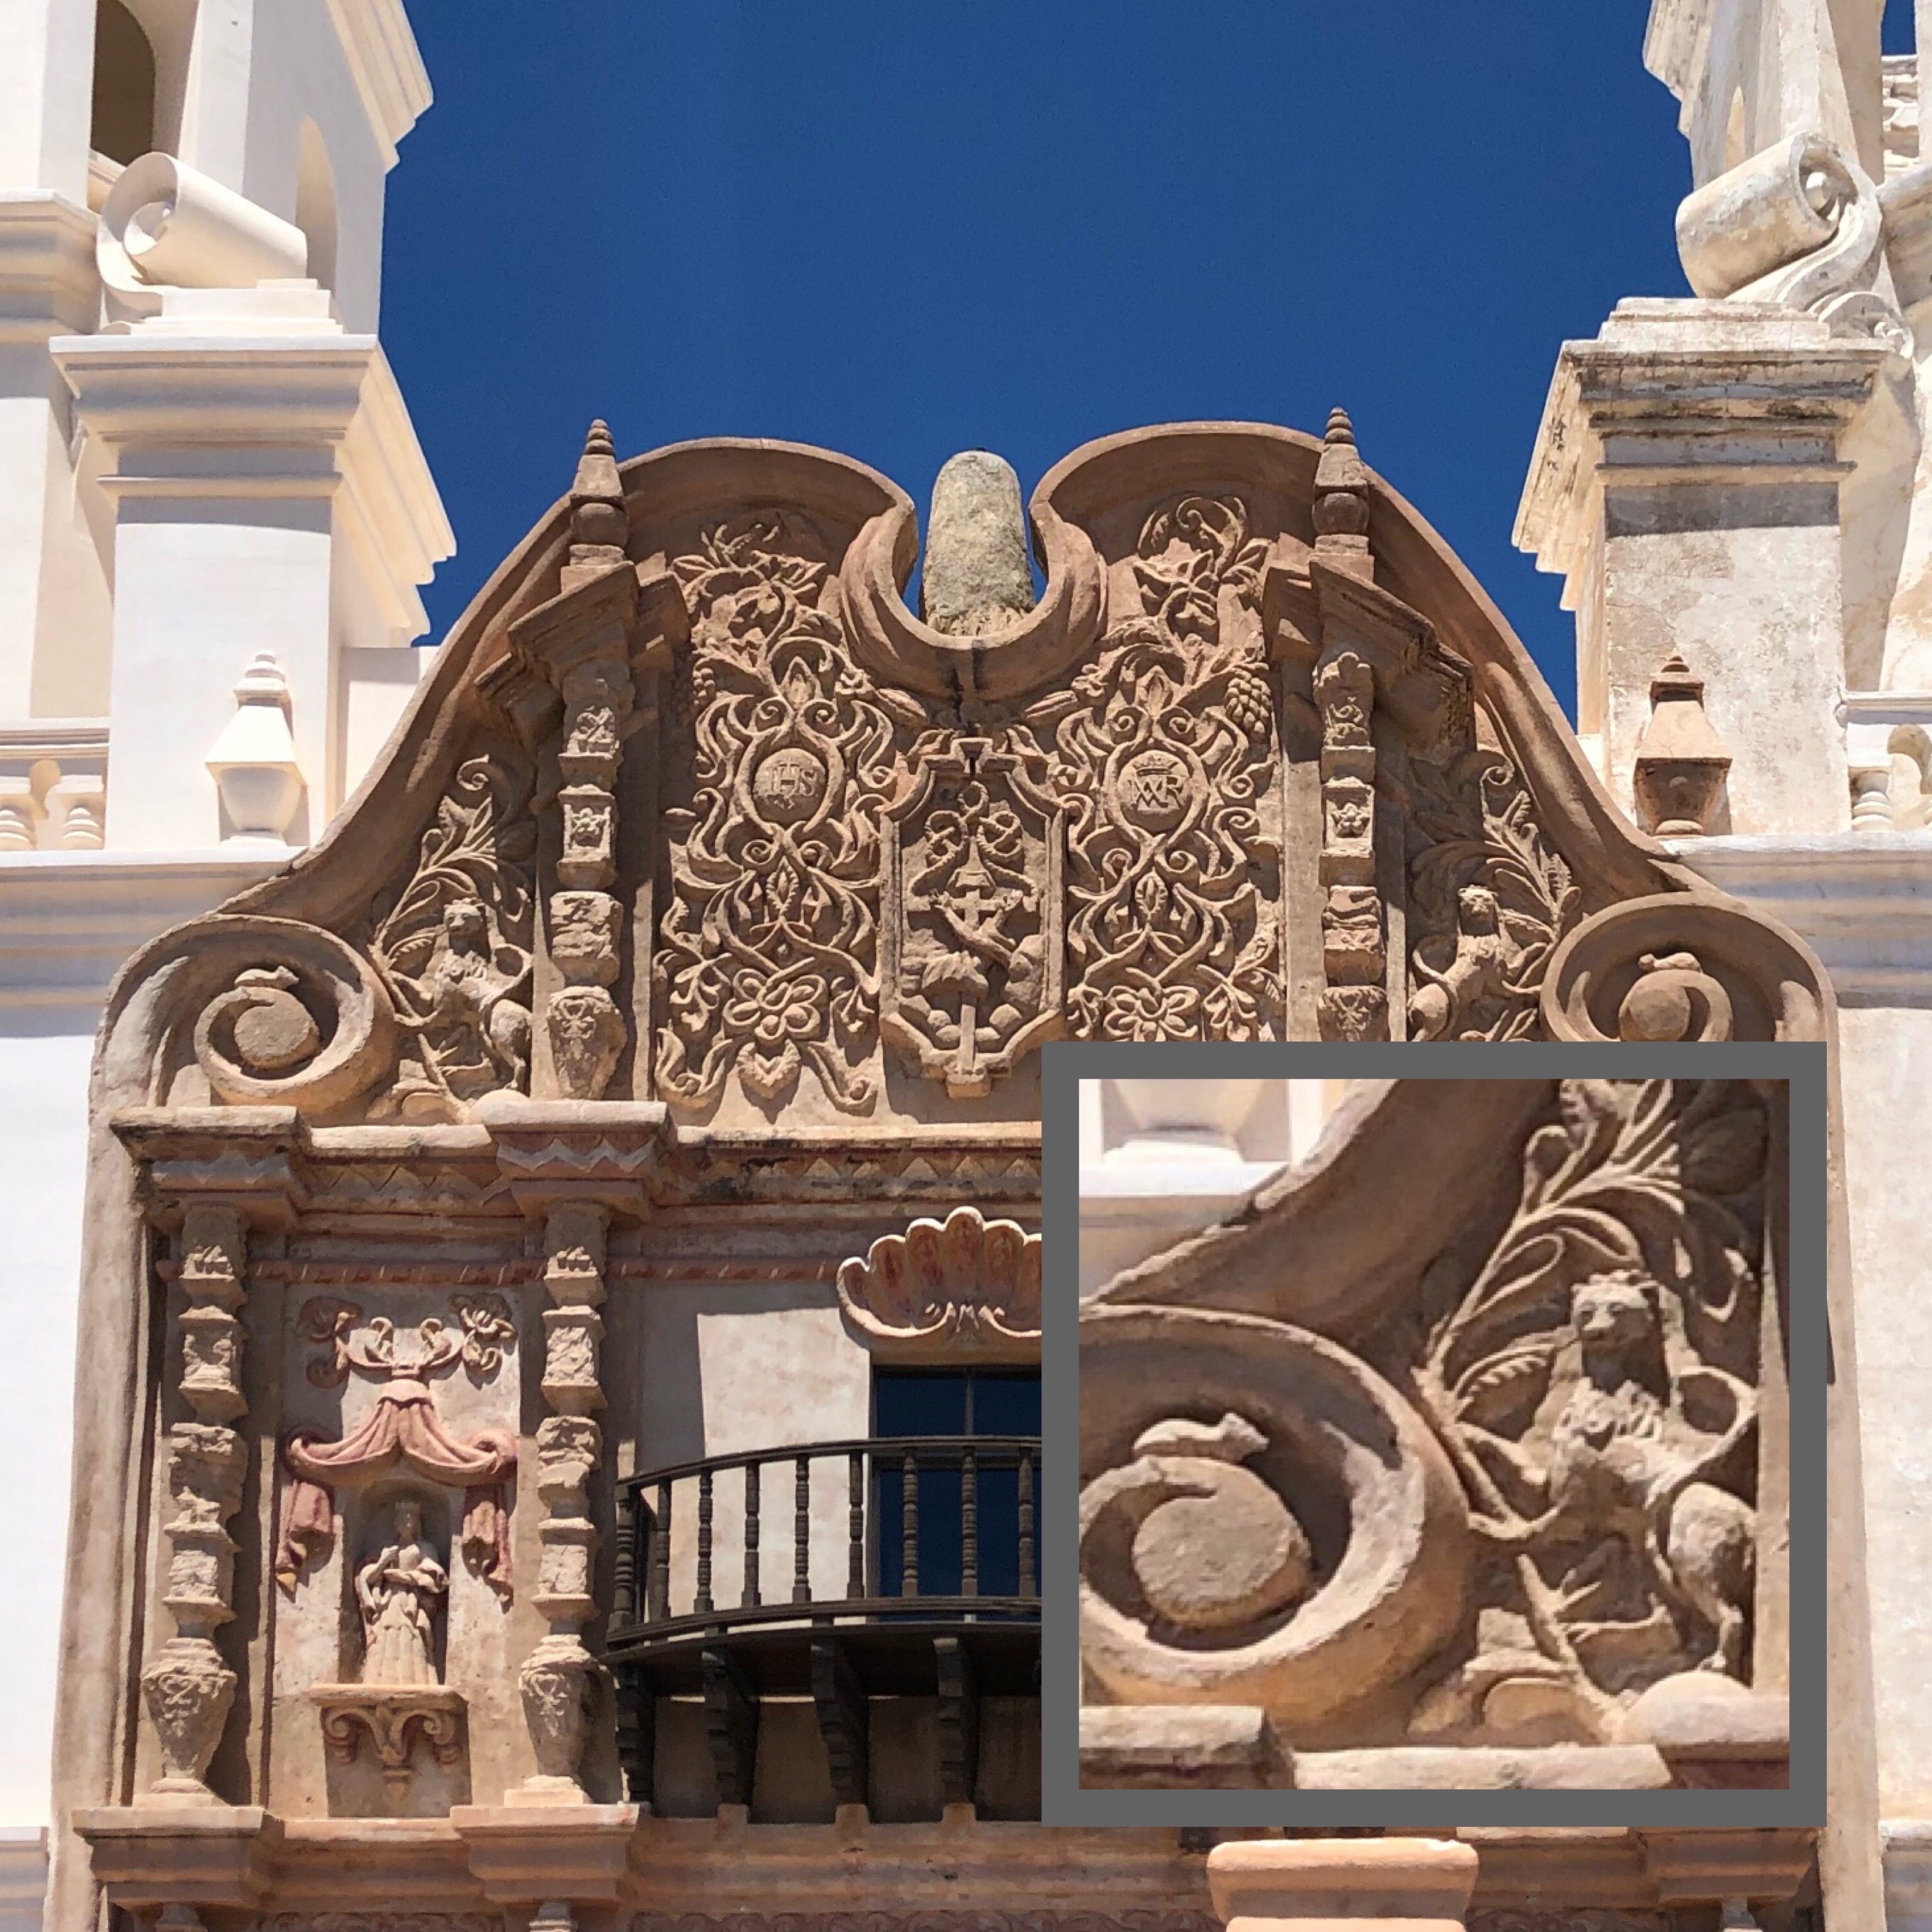 Cat and Mouse sculpted into the facade of Mission San Xavier del Bac